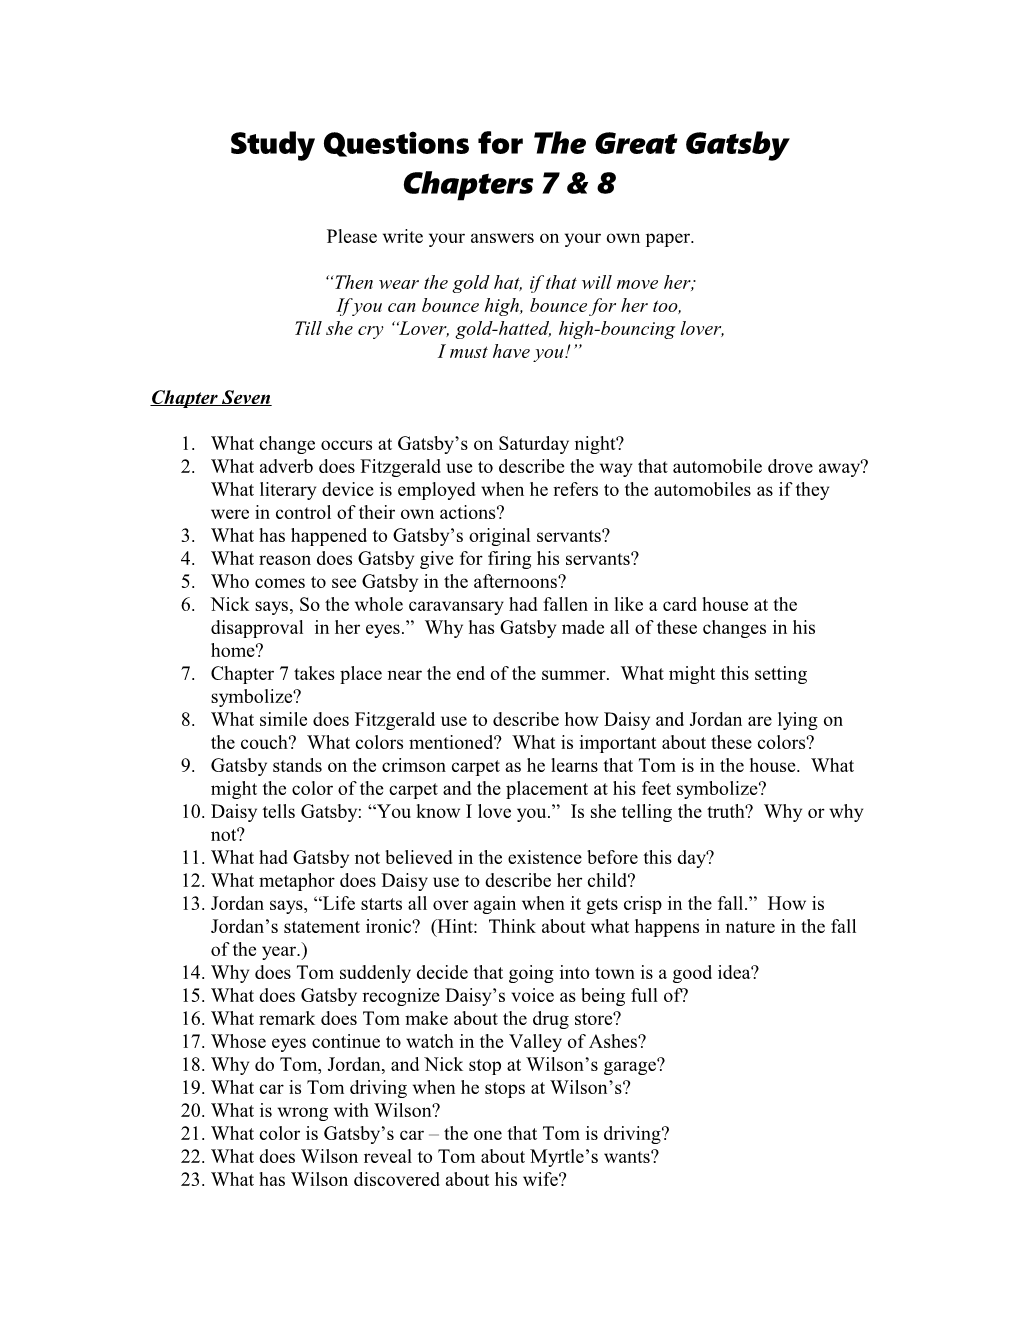 Study Questions for the Great Gatsby